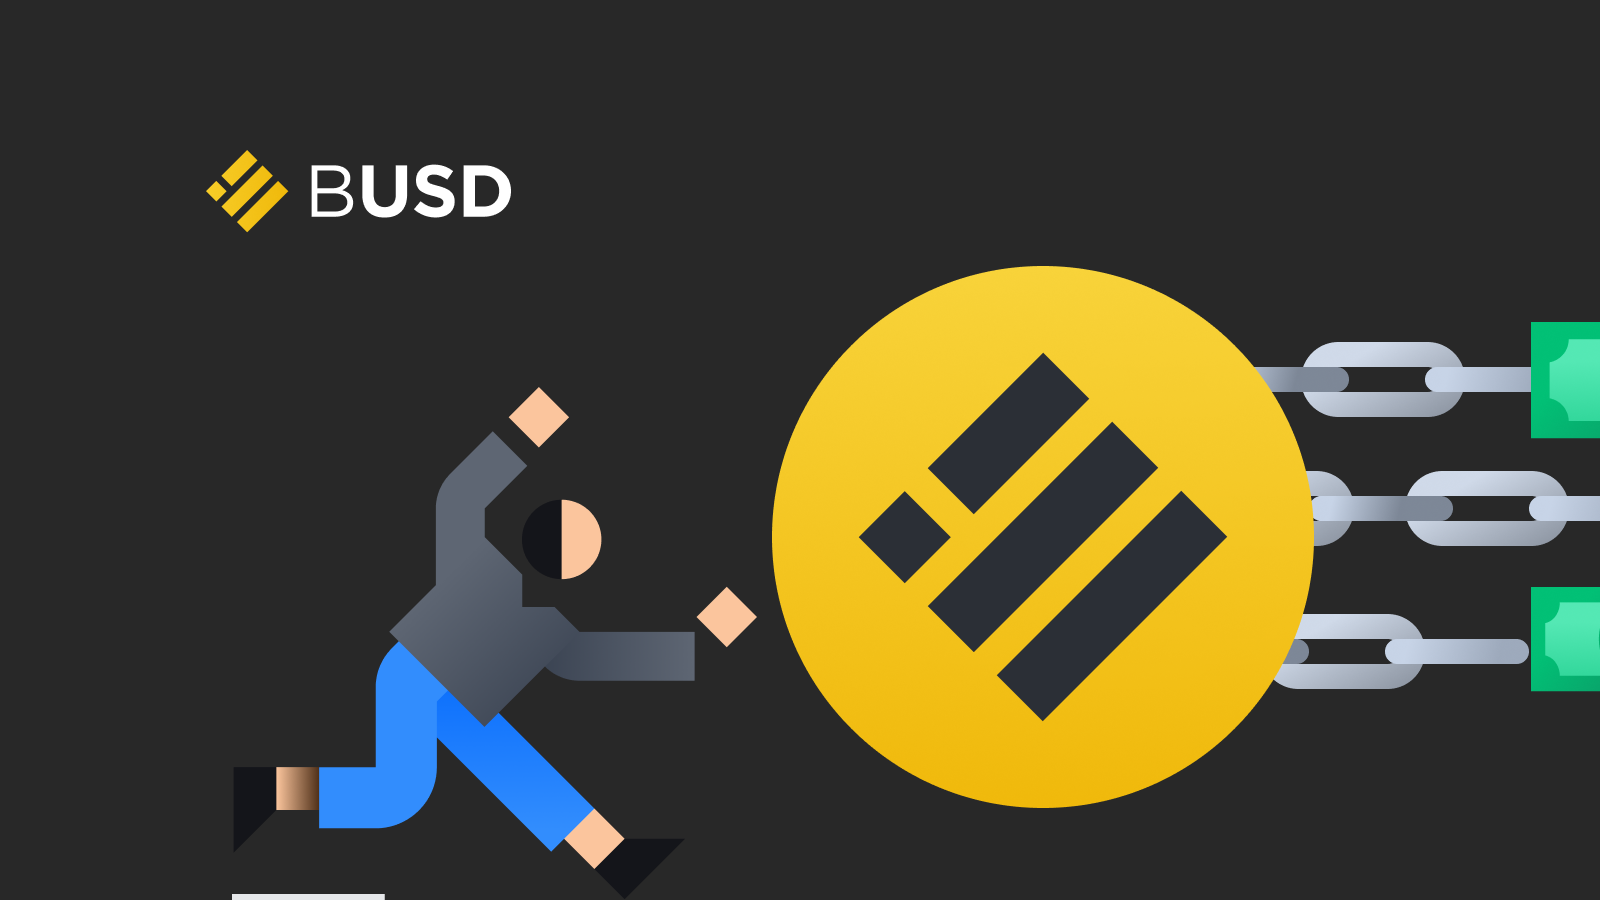 Binance and Paxos's BUSD: High Quality Reserves, Audits, and Regulation